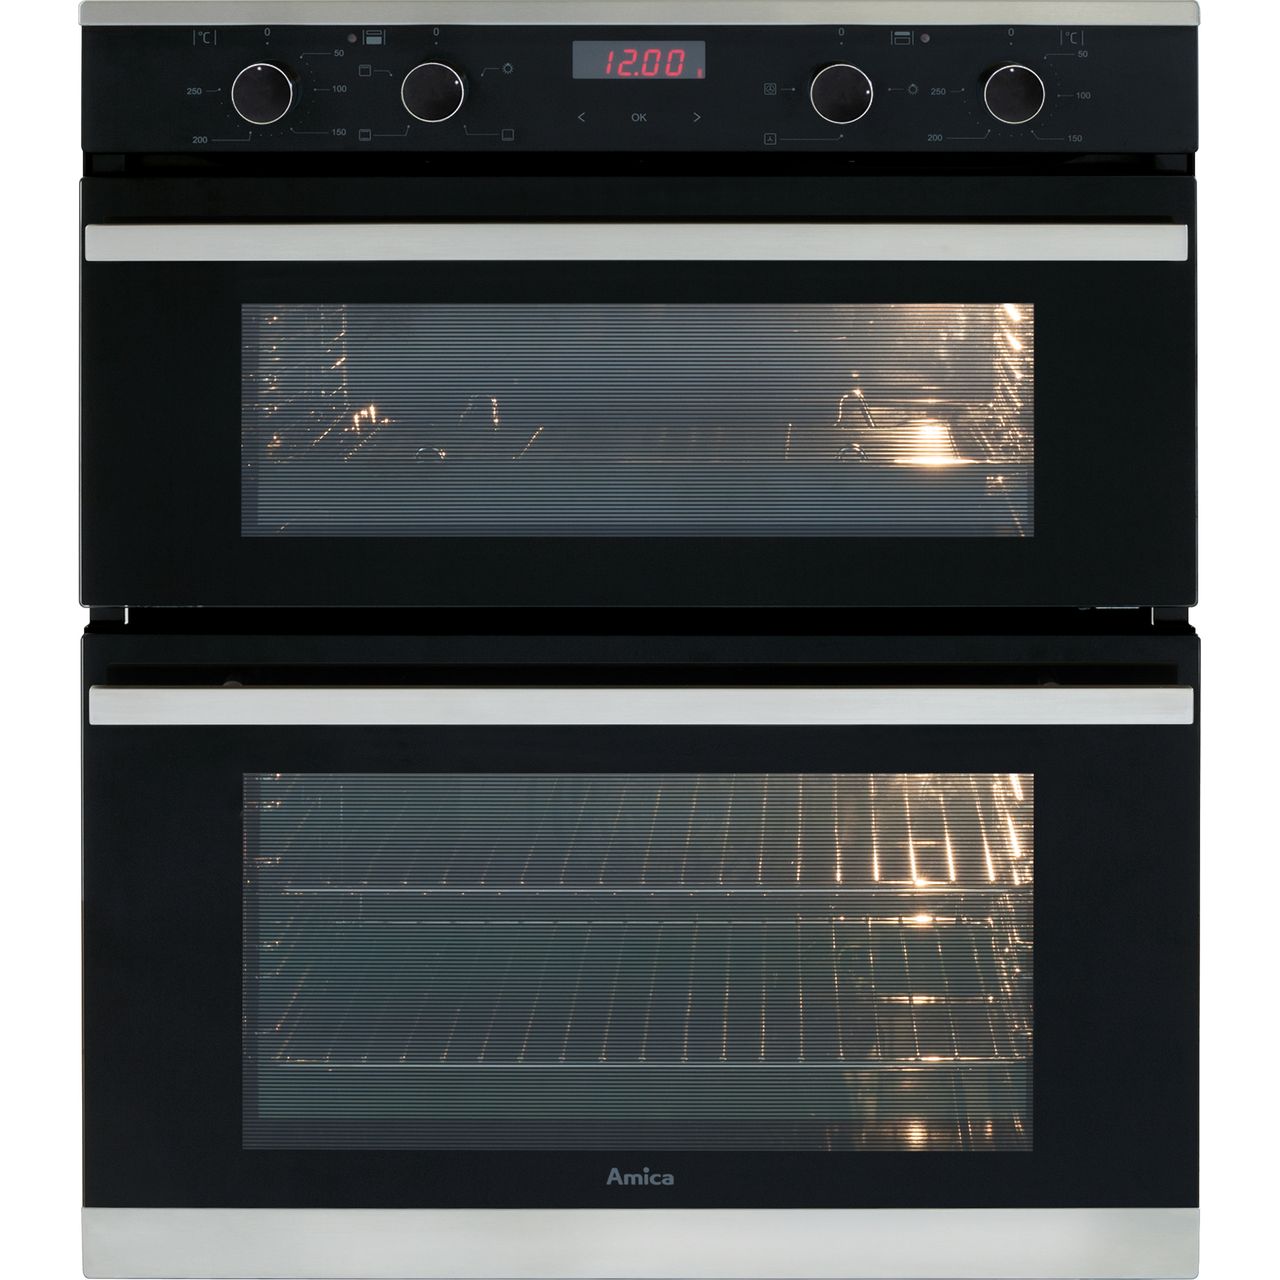 Amica ADC700SS Built Under Double Oven Review